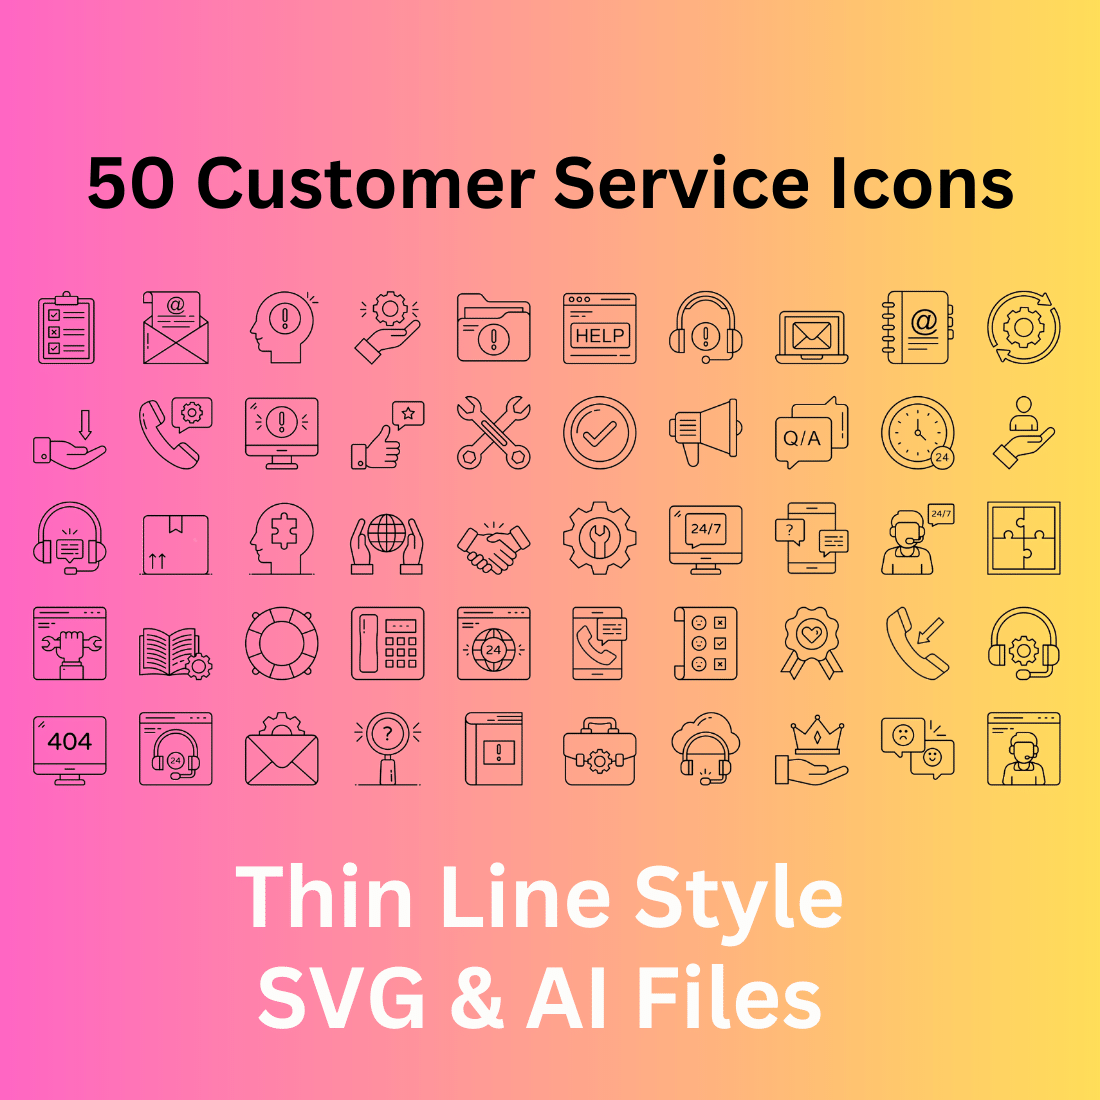 our services icons